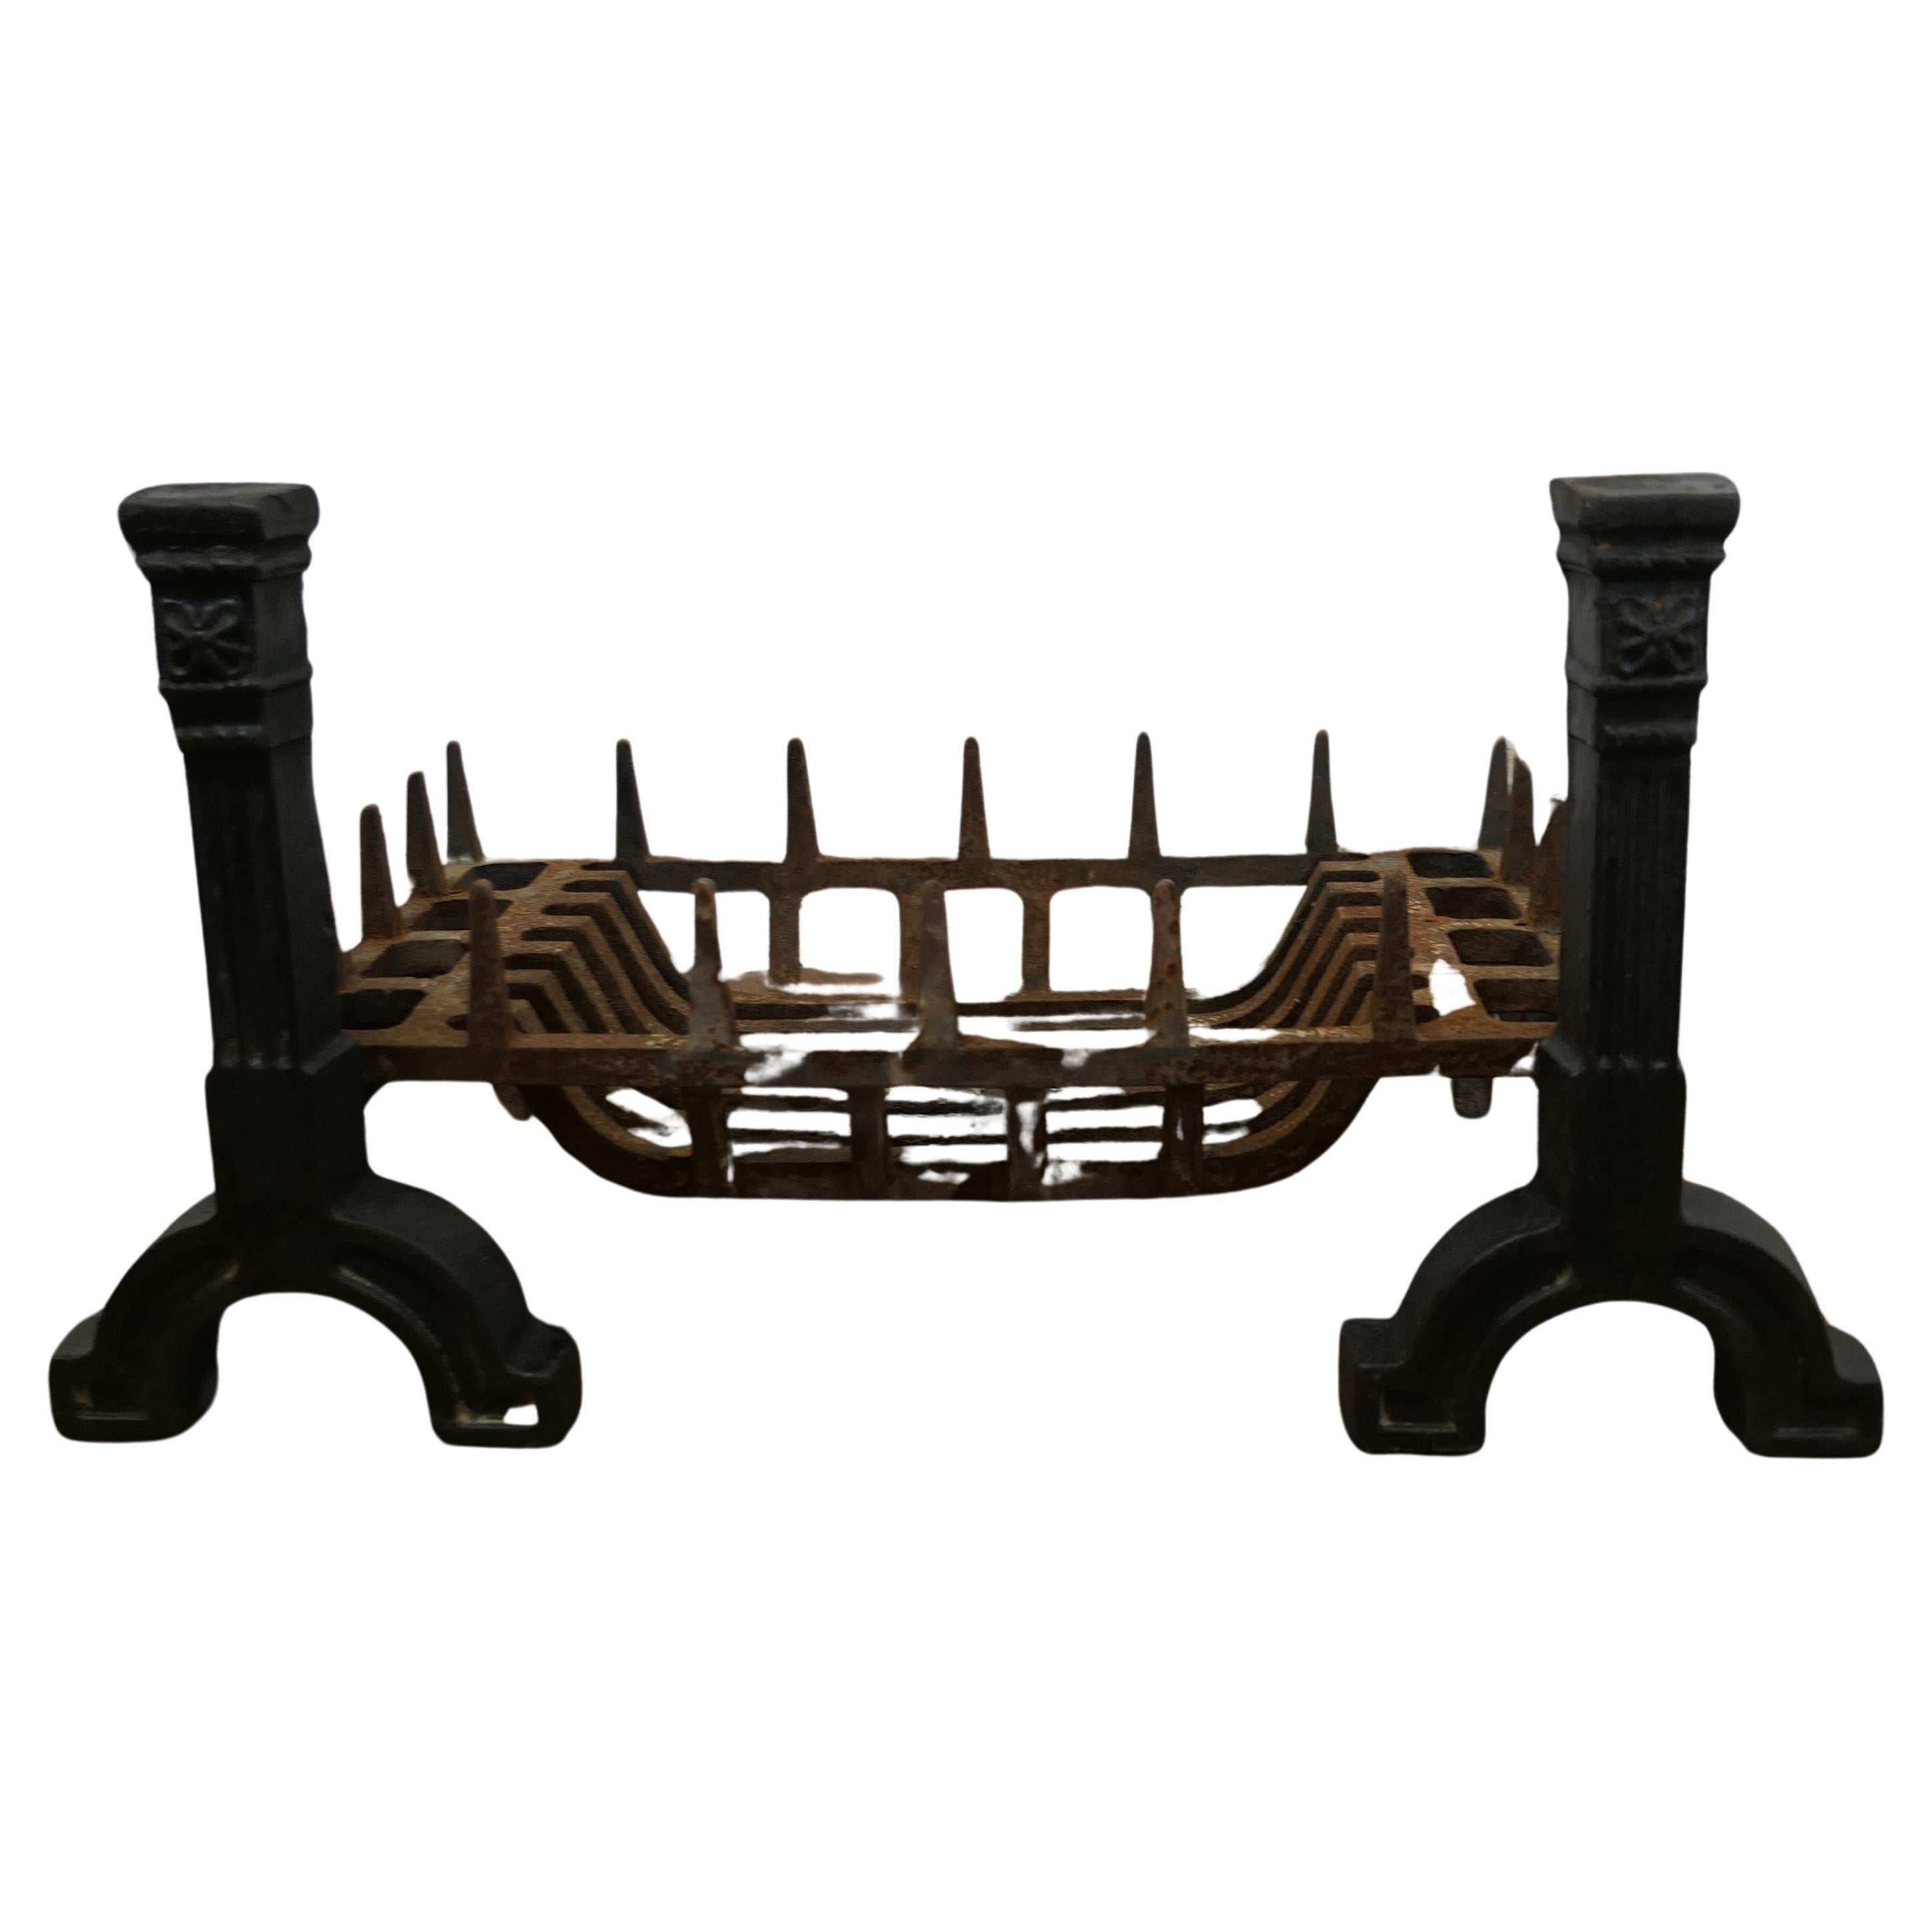 Large 19th Century Inglenook Fire Grate on Andirons